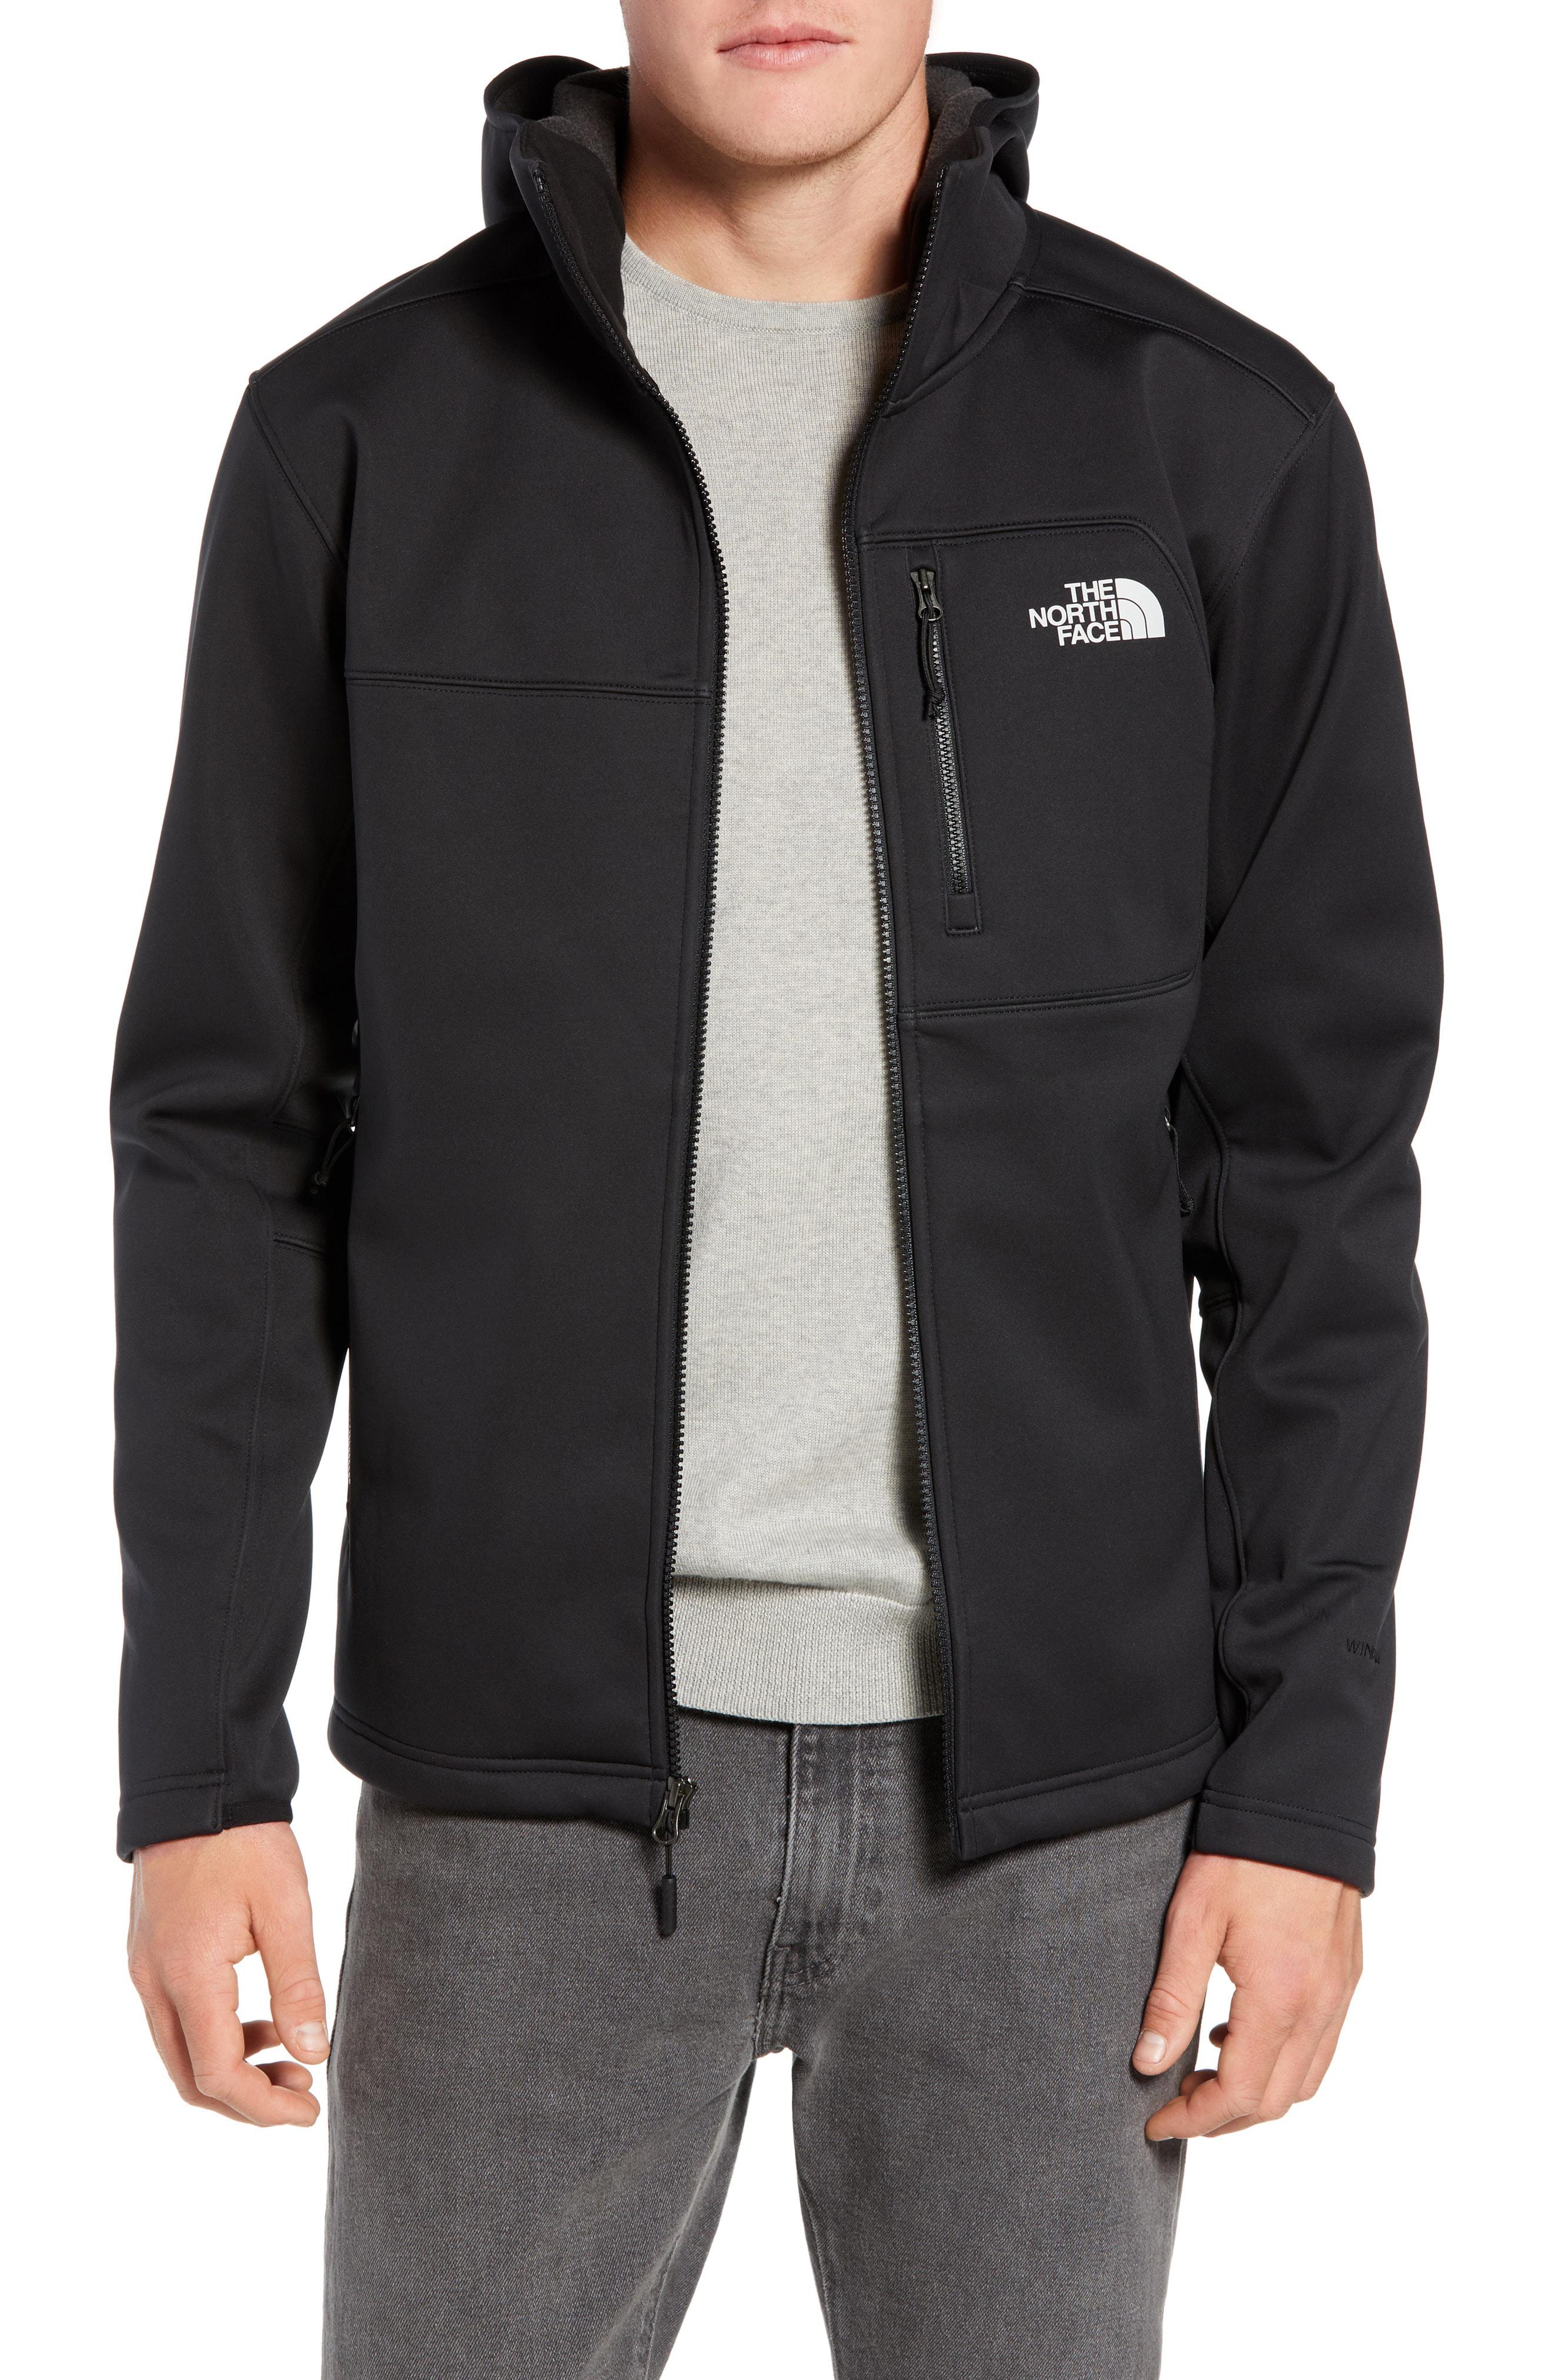 Lyst - The North Face North Face Apex Risor Hooded Jacket in Black for Men